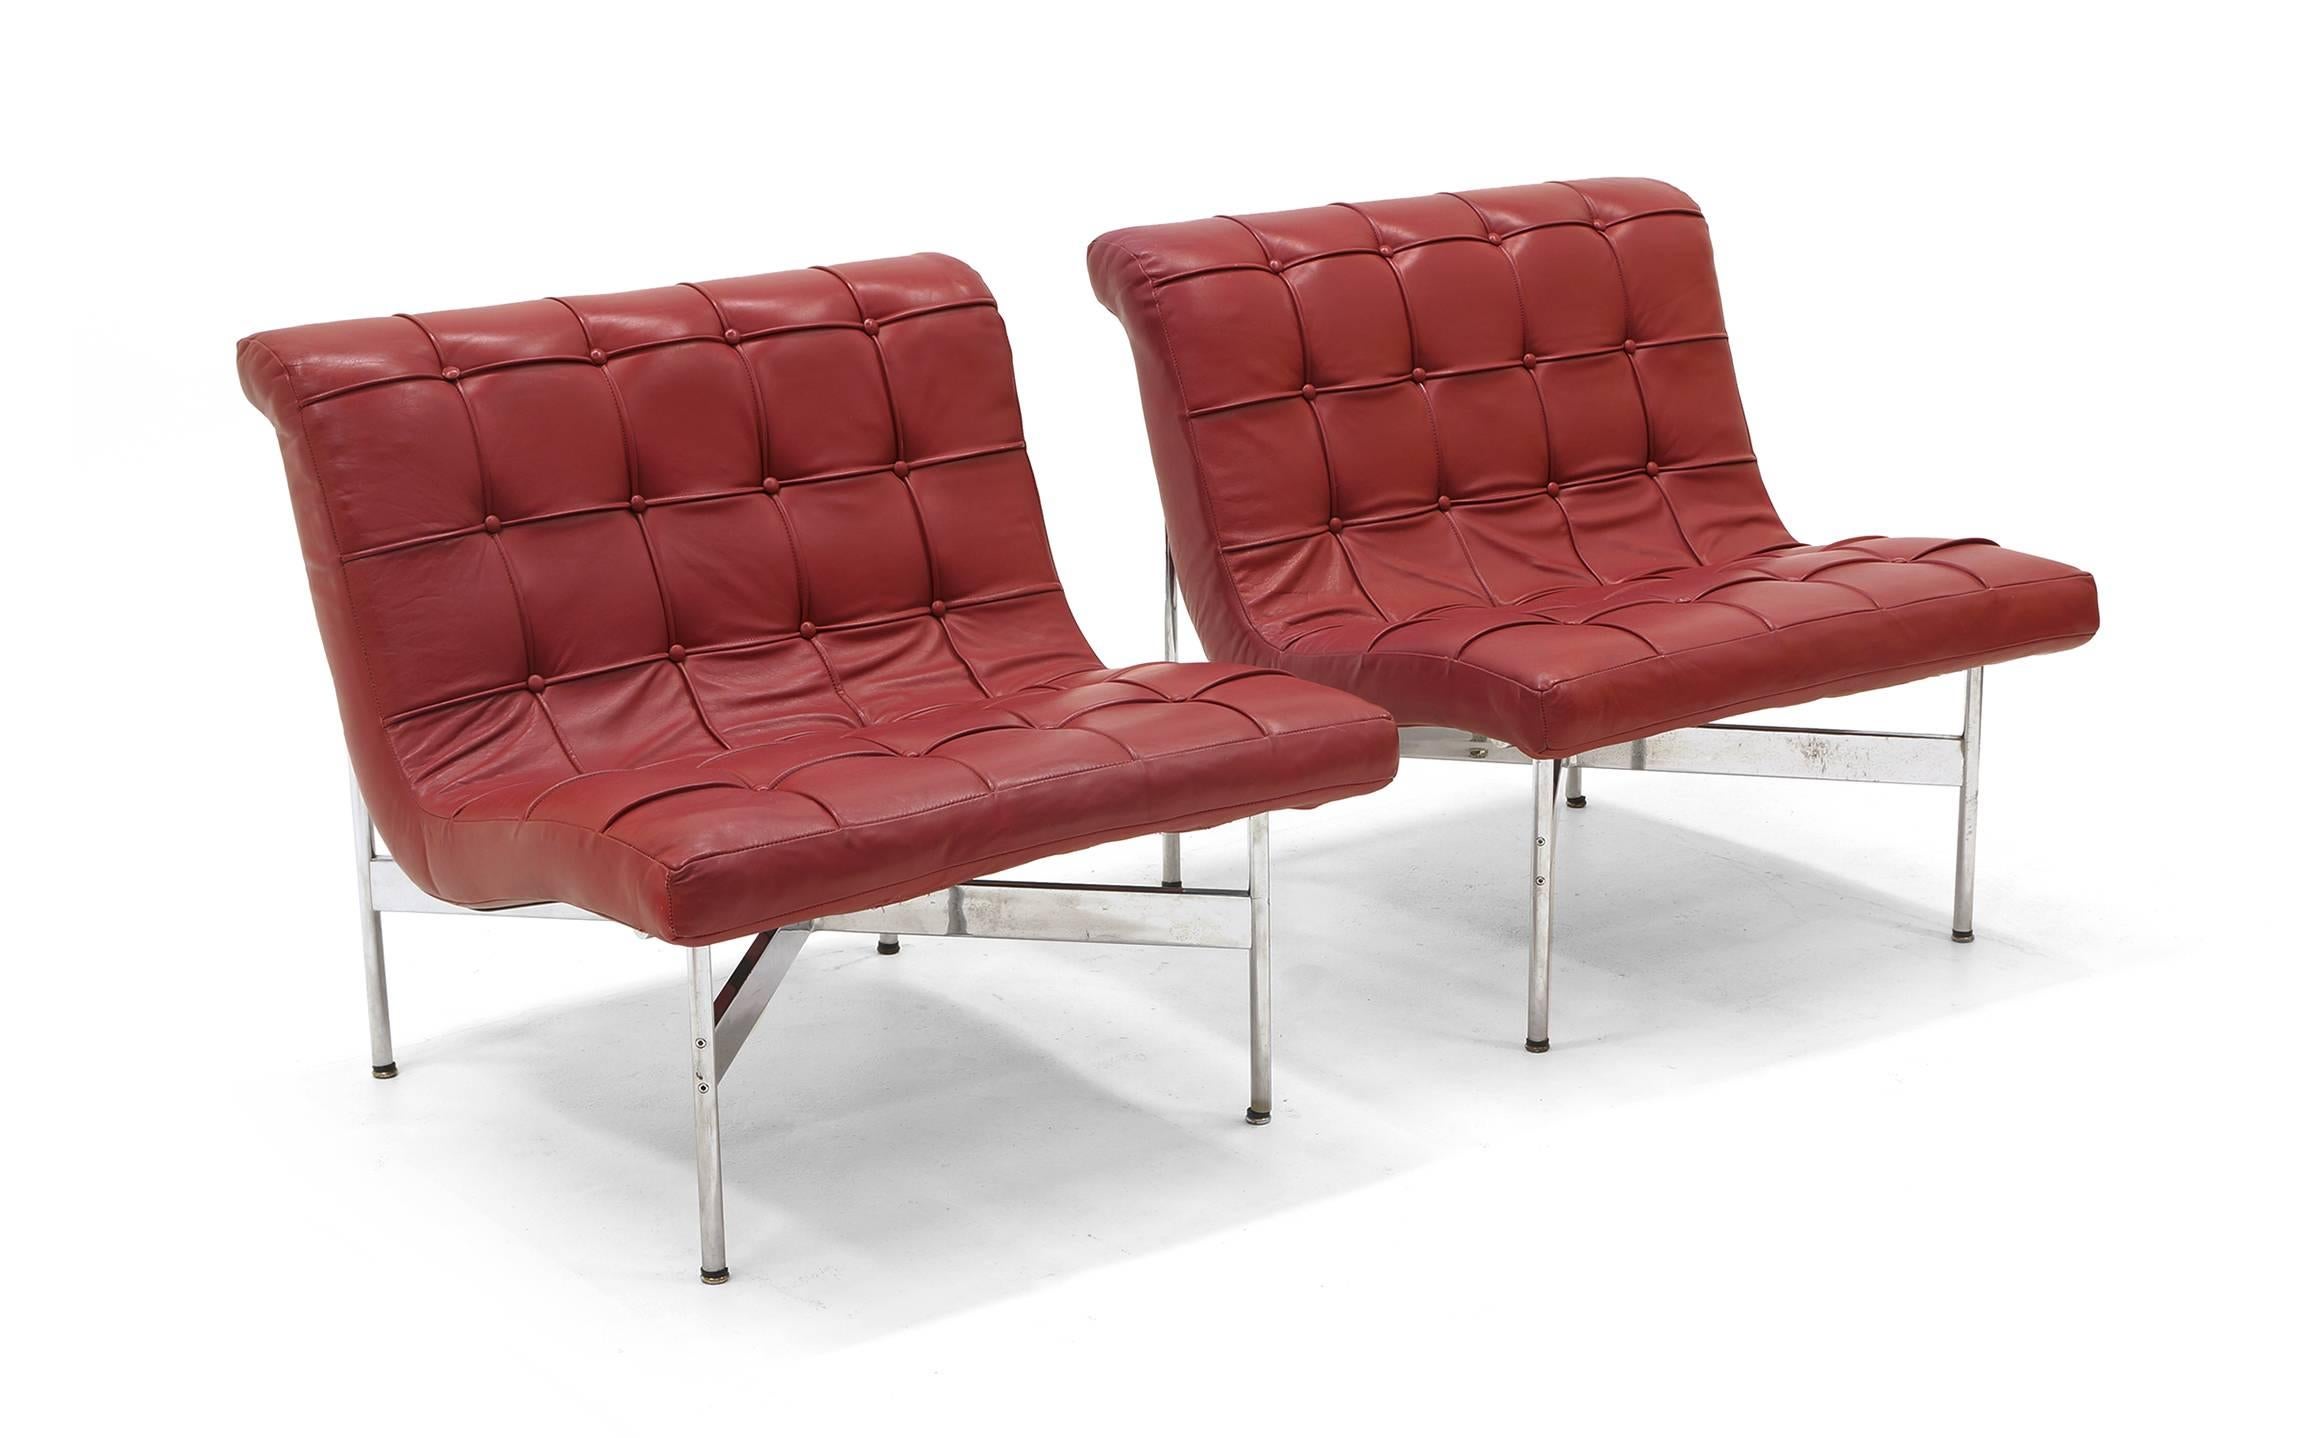 Pair of Laverne Red Leather Lounge Chairs In Good Condition For Sale In Kansas City, MO